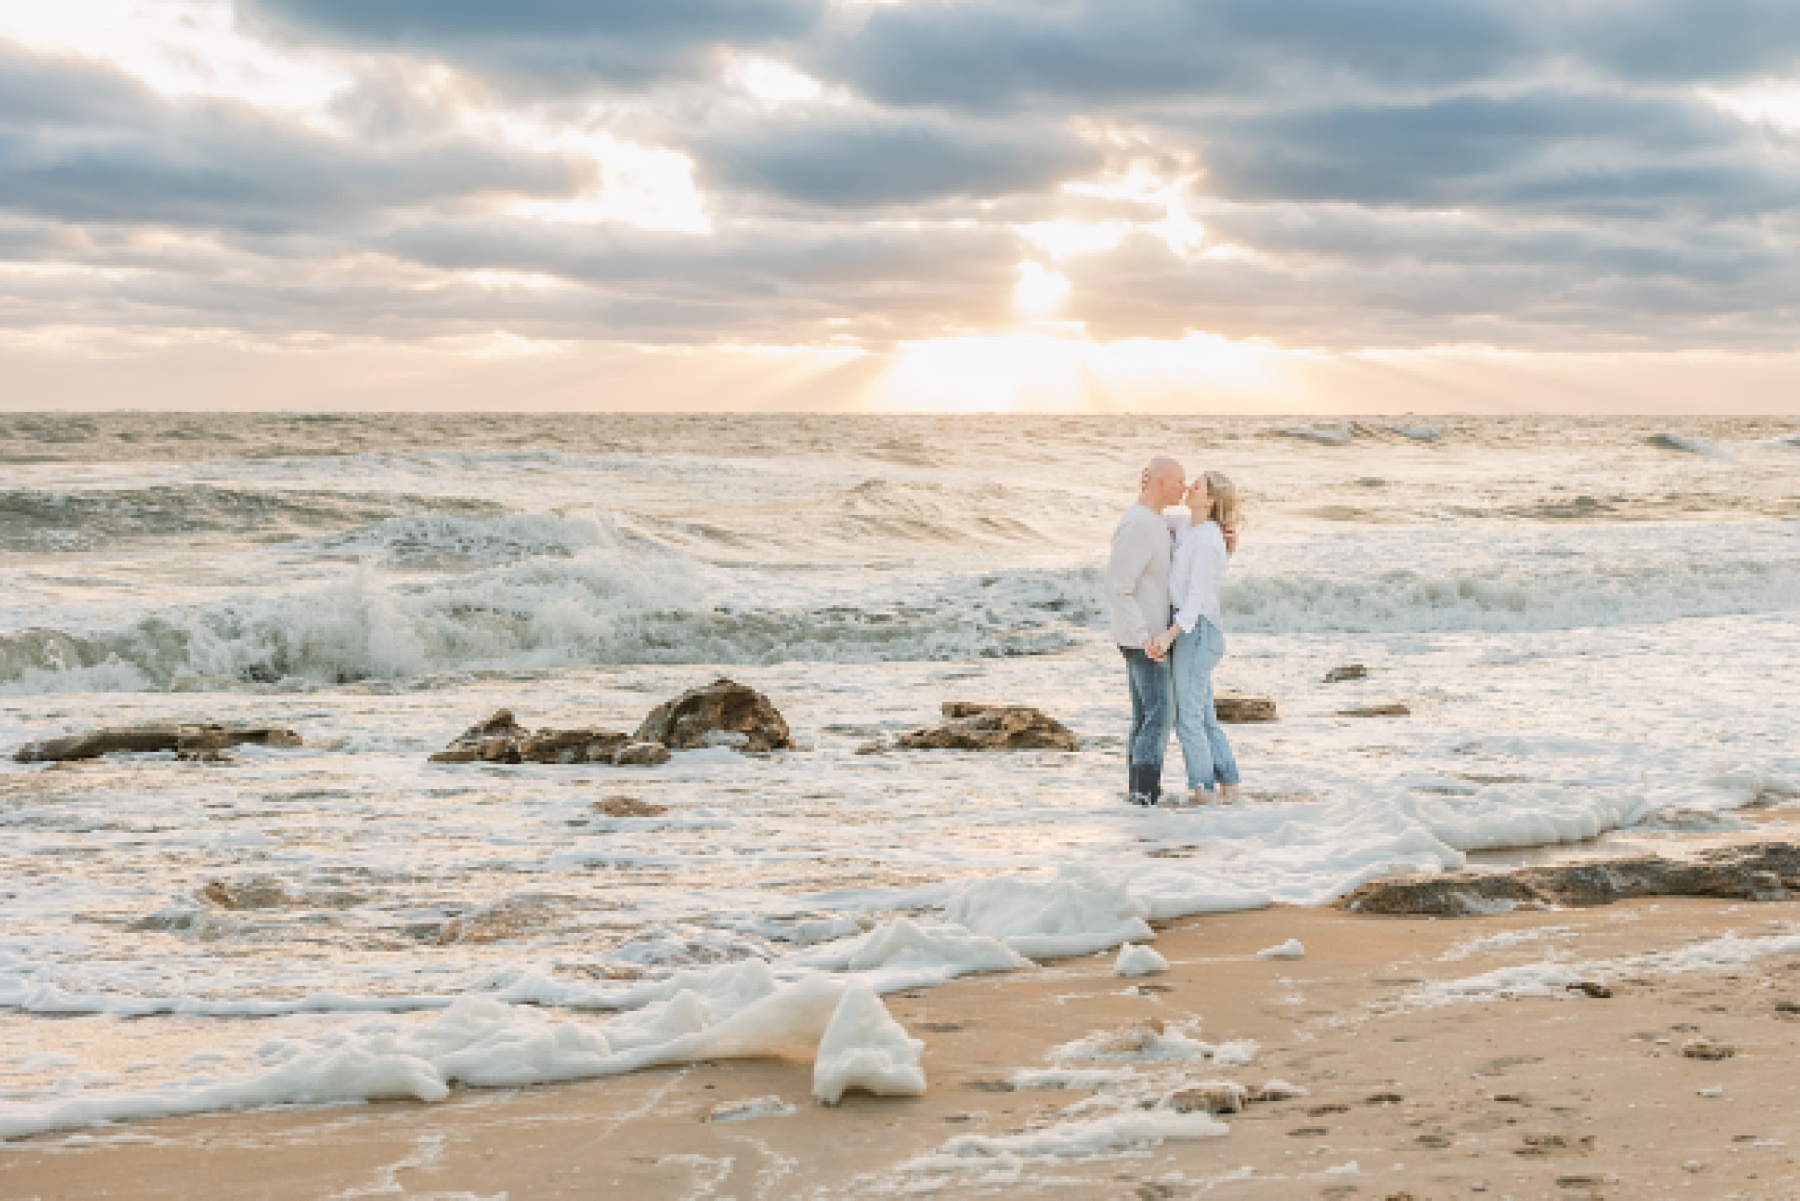 couples in jeans and white shirts holding each other in the water at sunrise on the beach